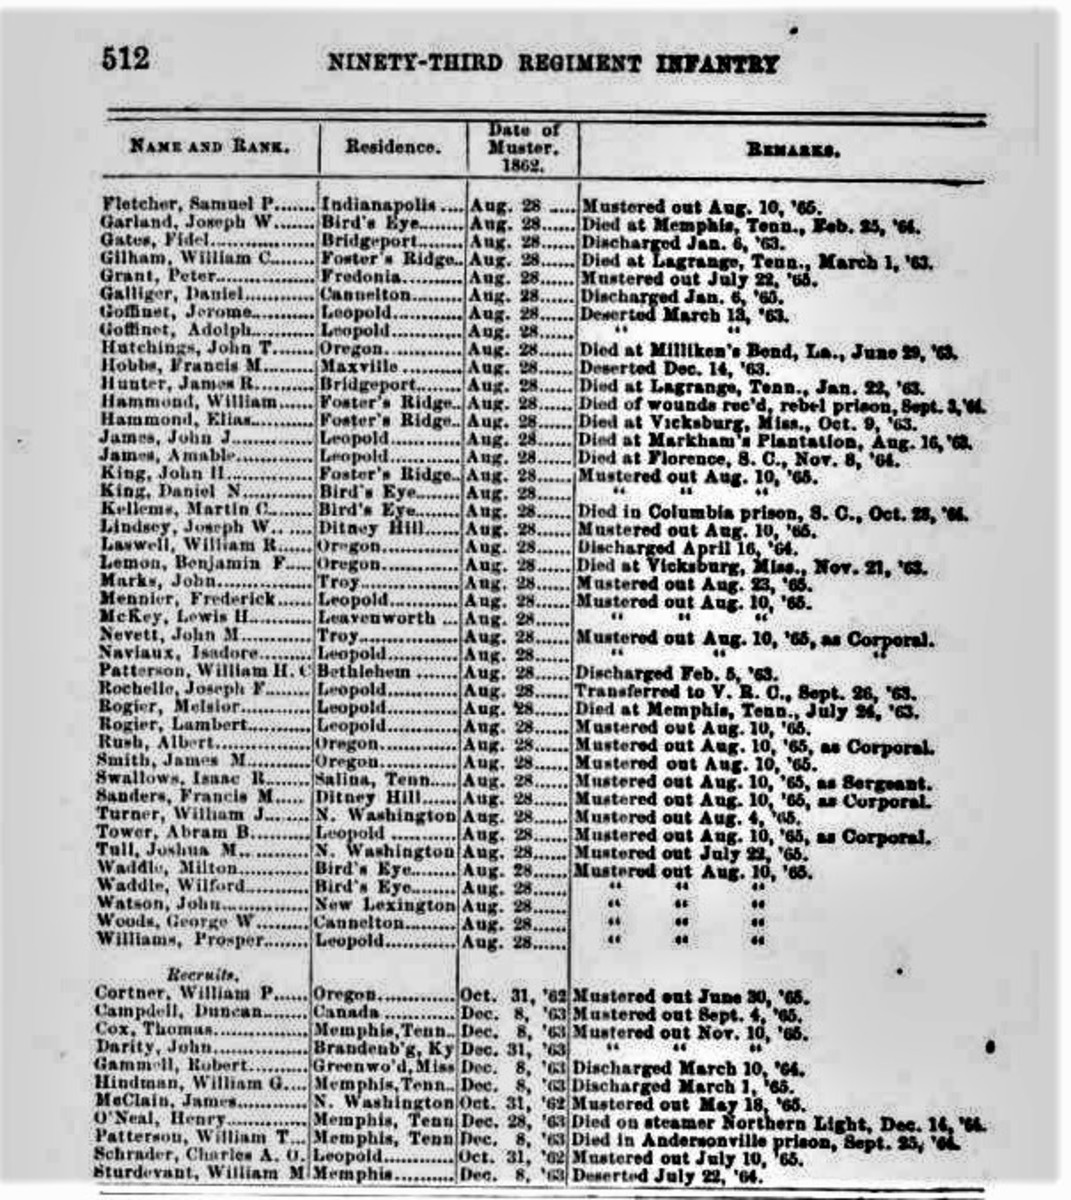 Names F to W - Information on each man's discharge or death.